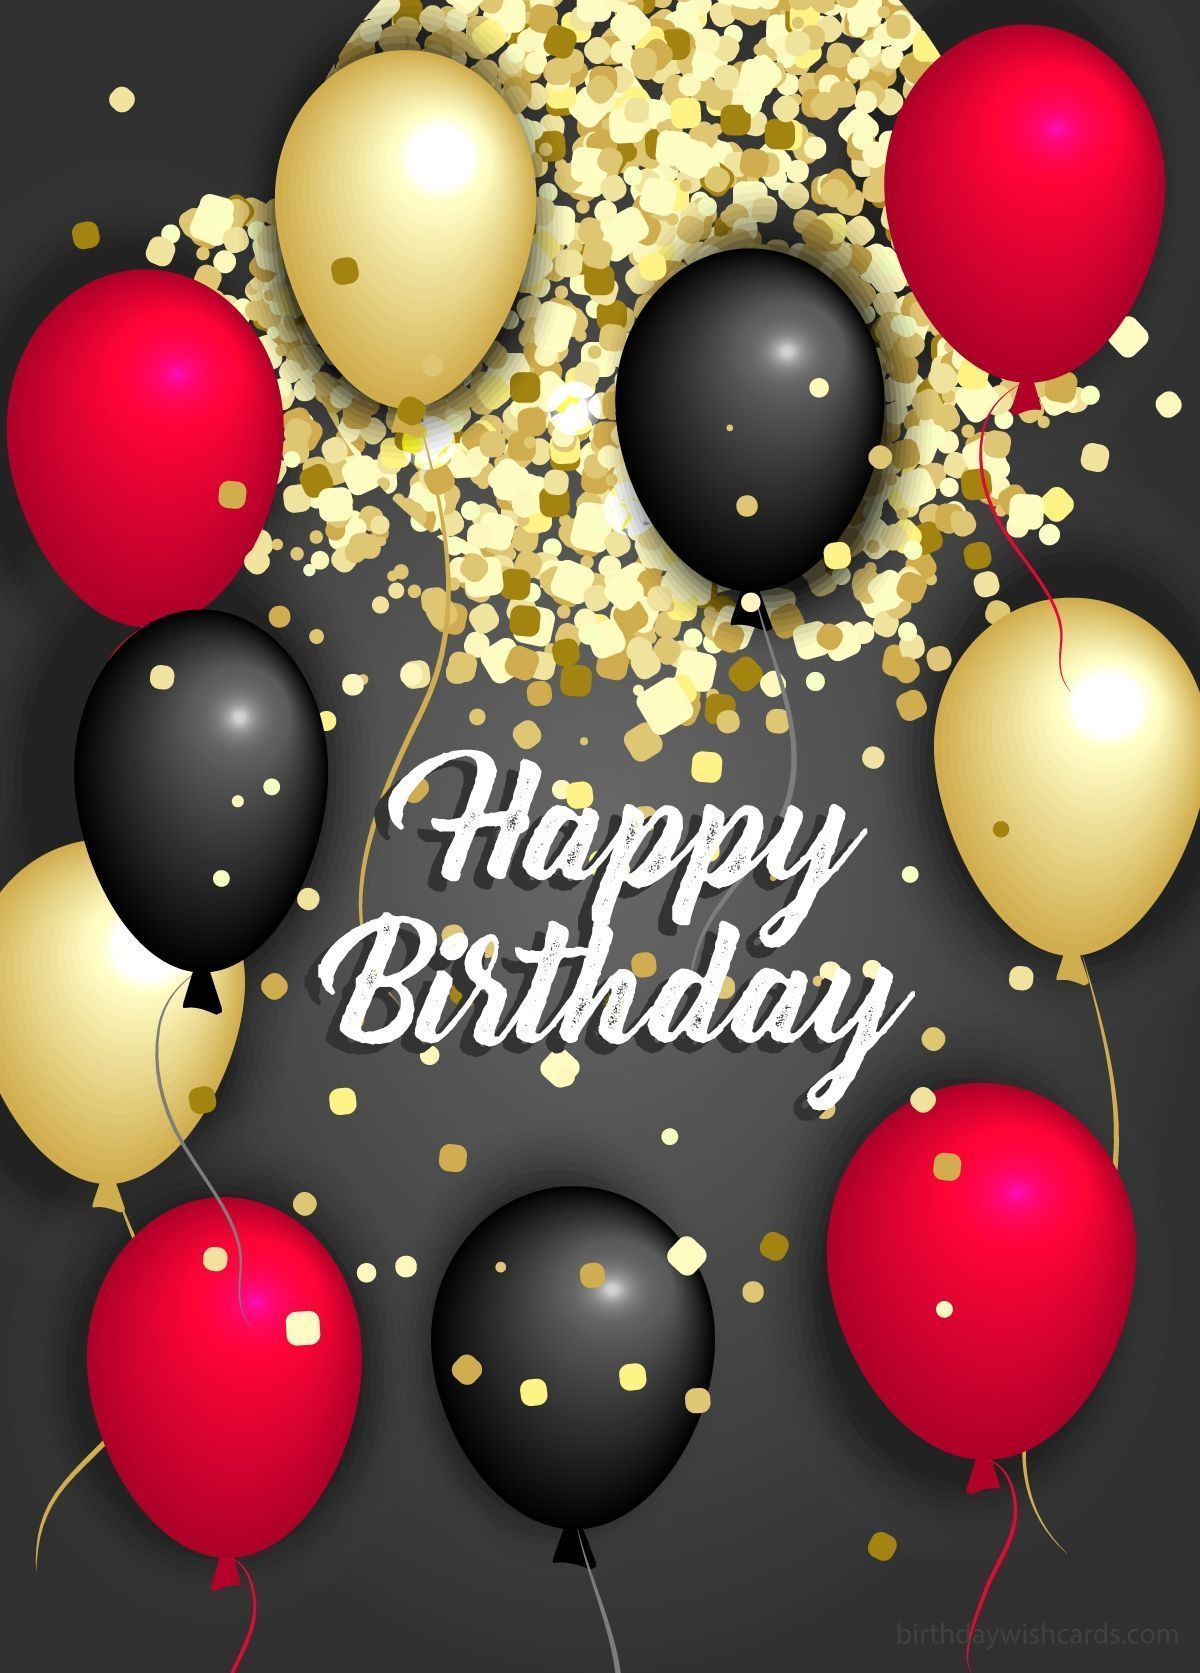 Black, red and gold balloons on a black background with golden confetti. - Birthday, balloons